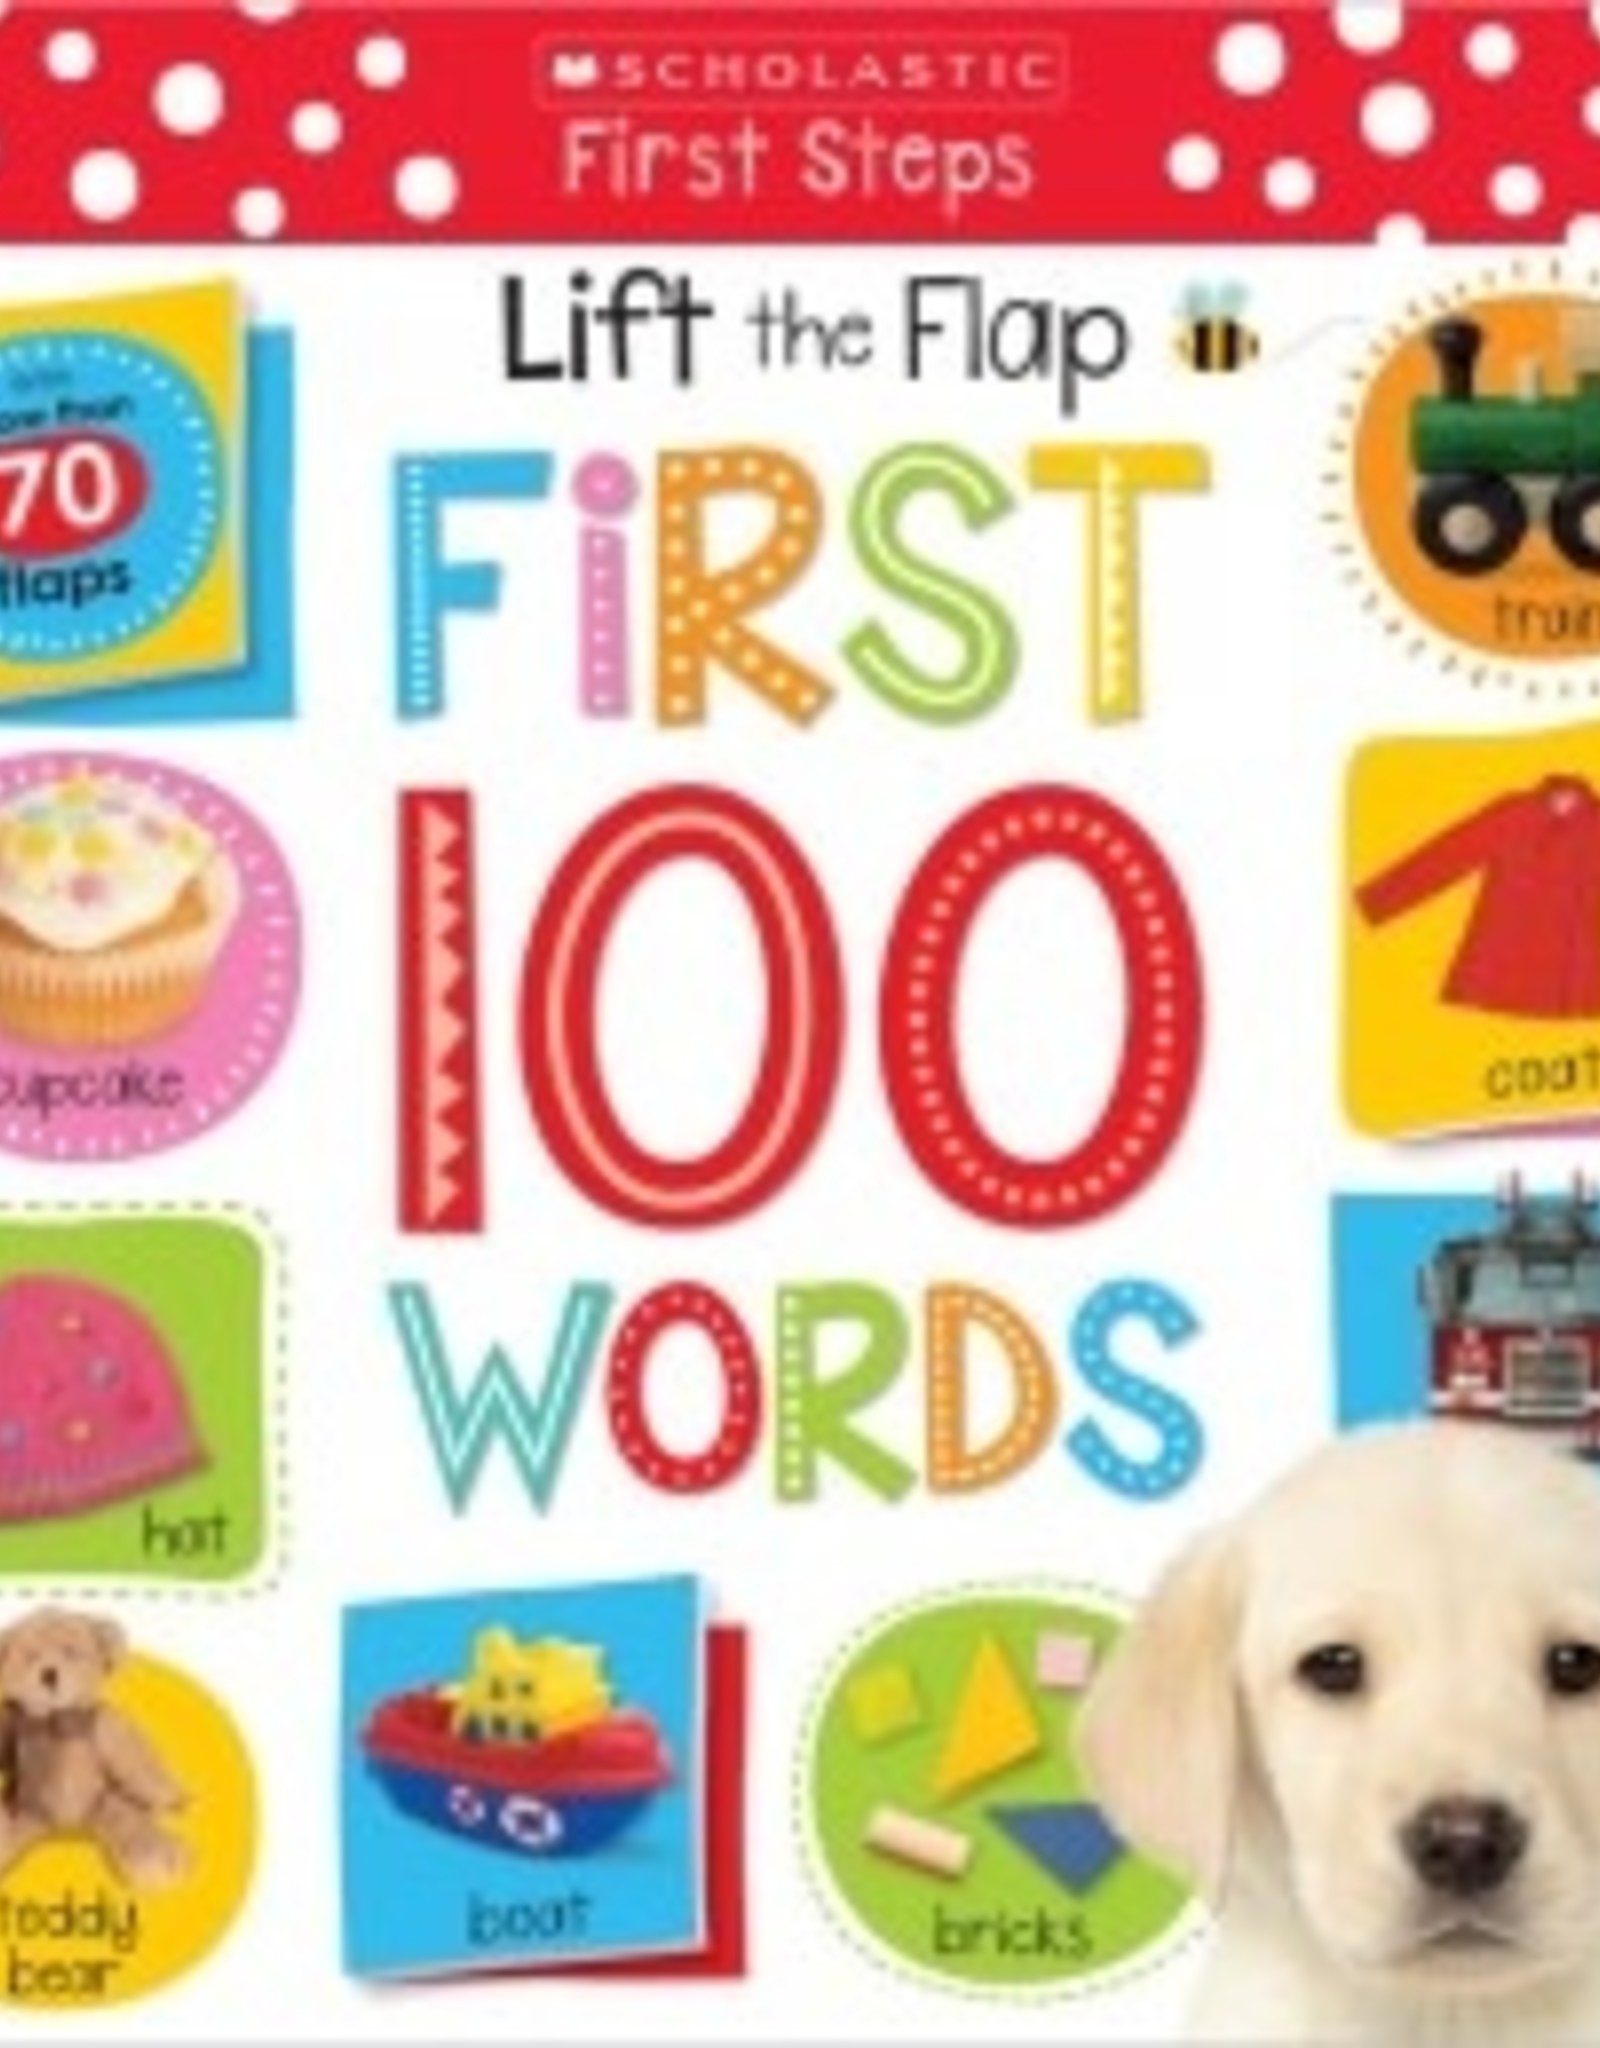 Scholastic Lift the Flap First 100 Words